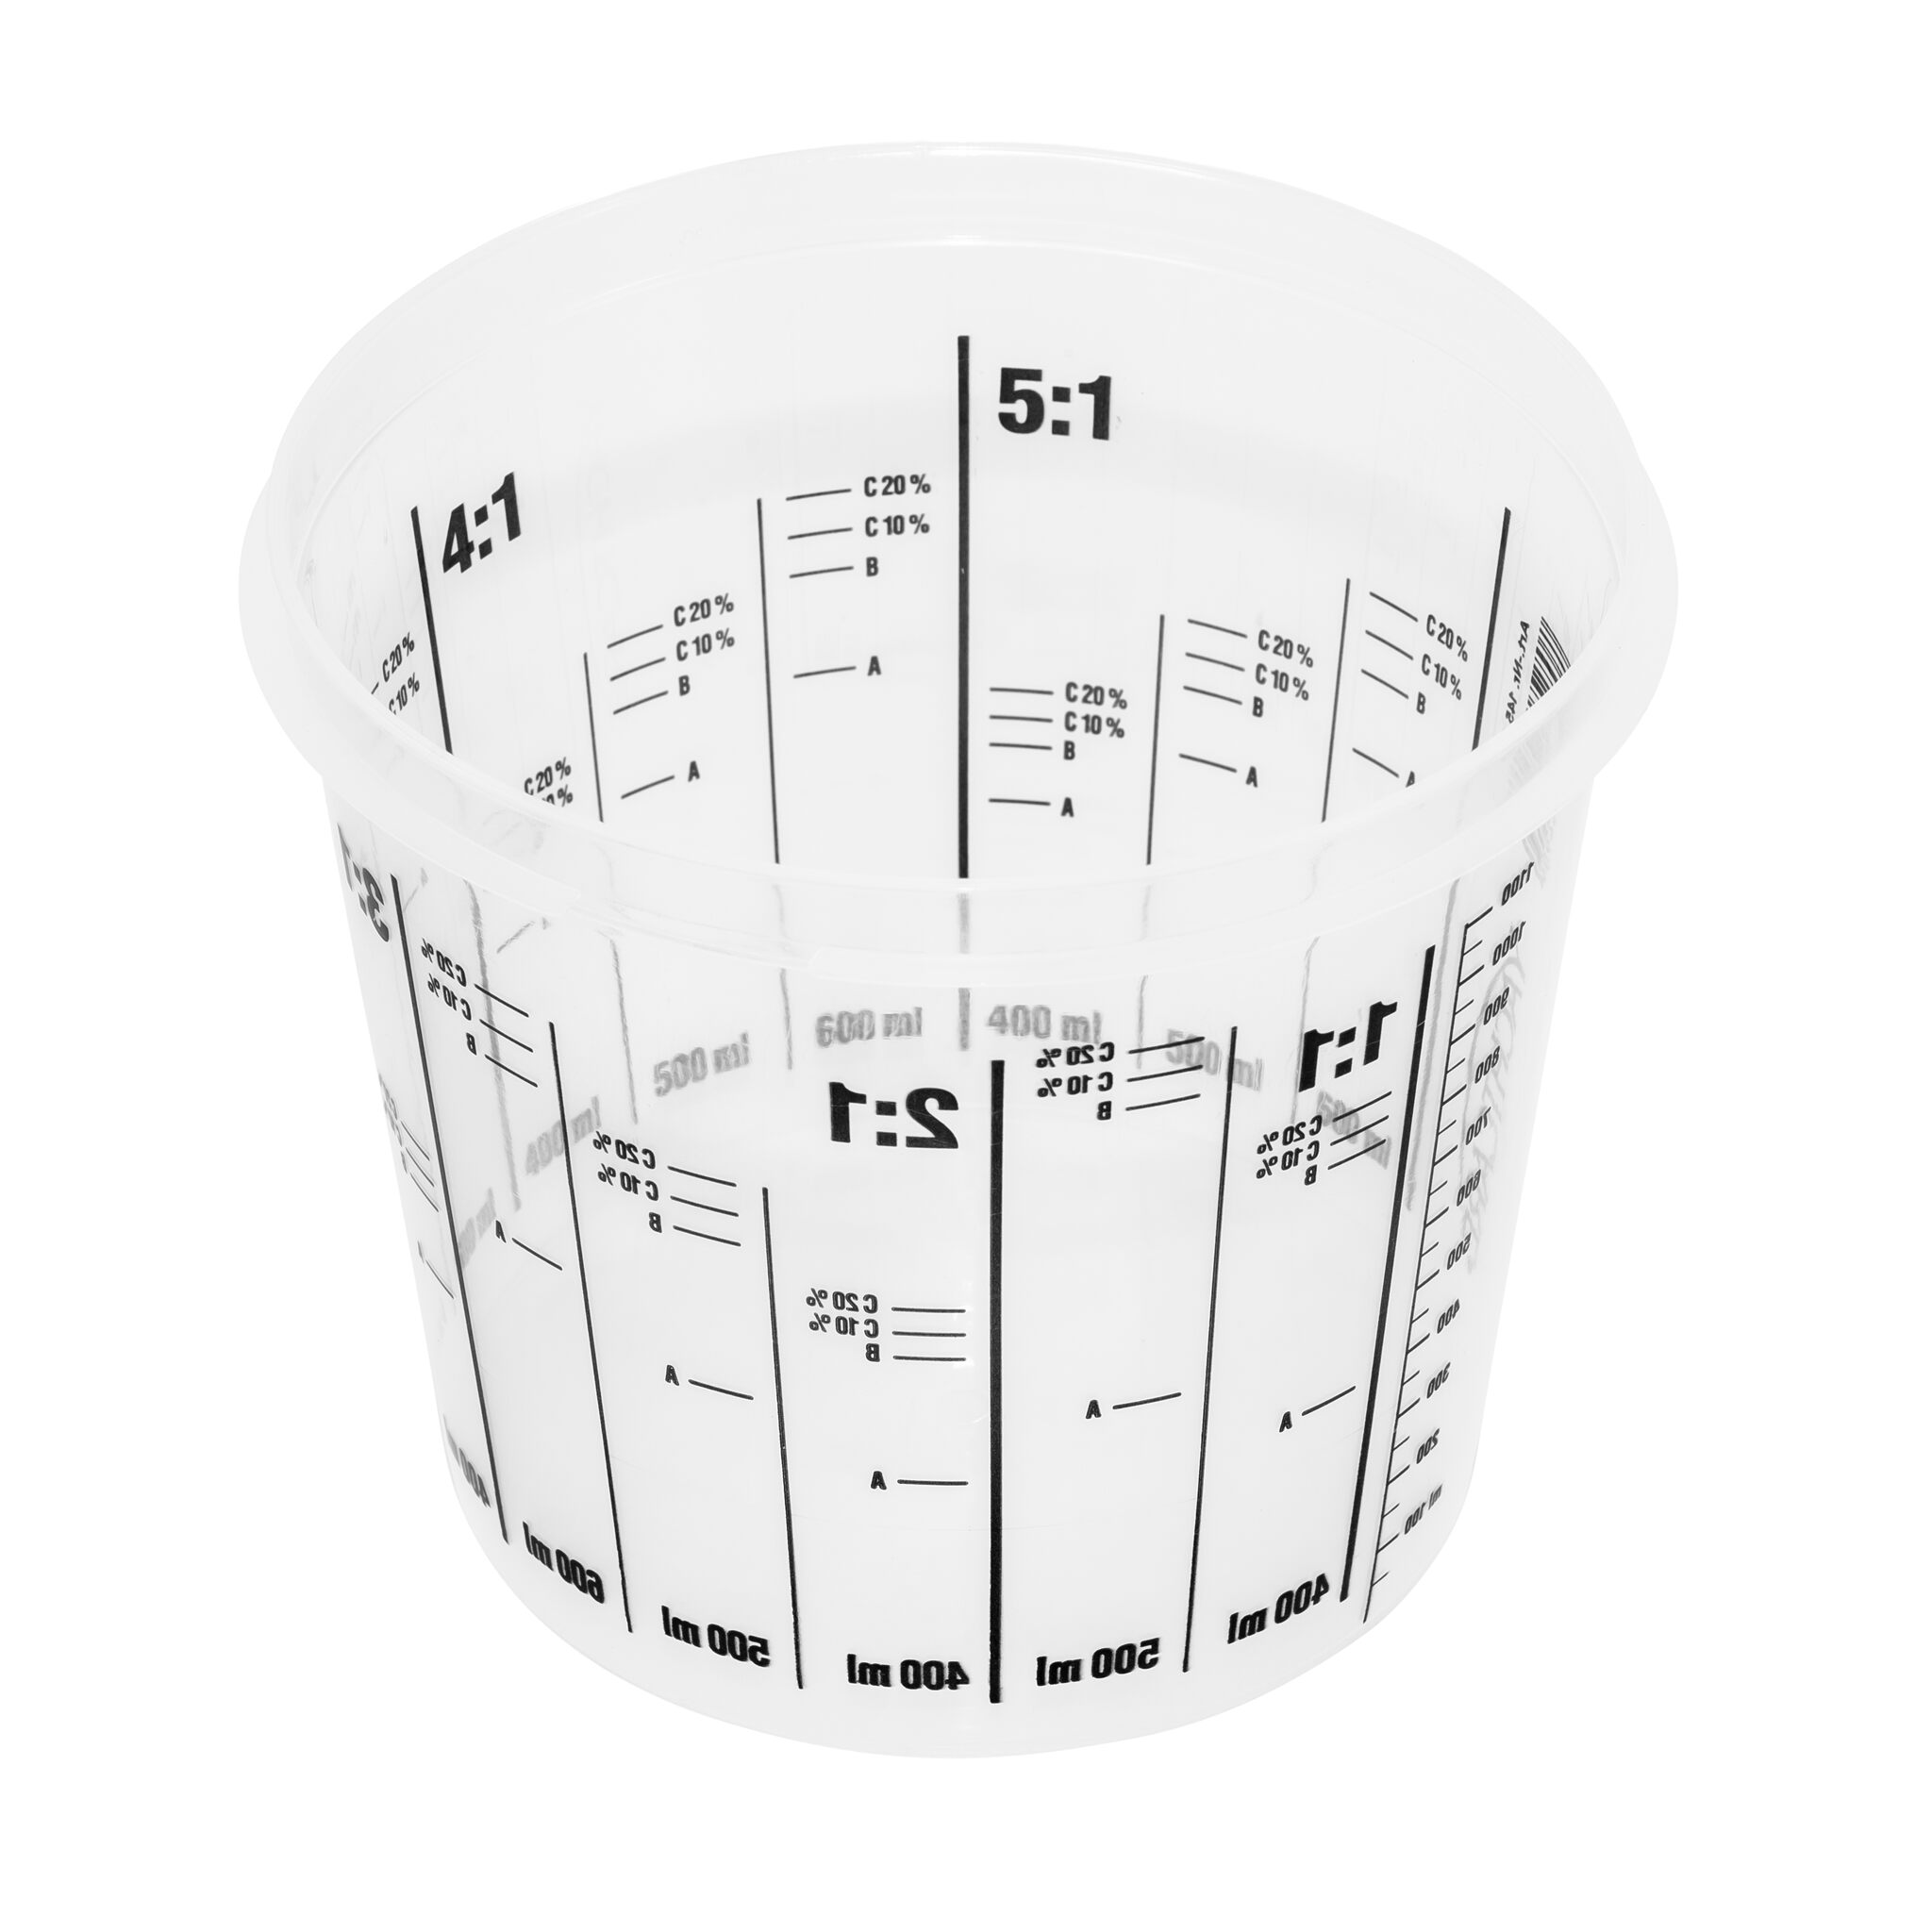 Yachtcare disposable mixing cup